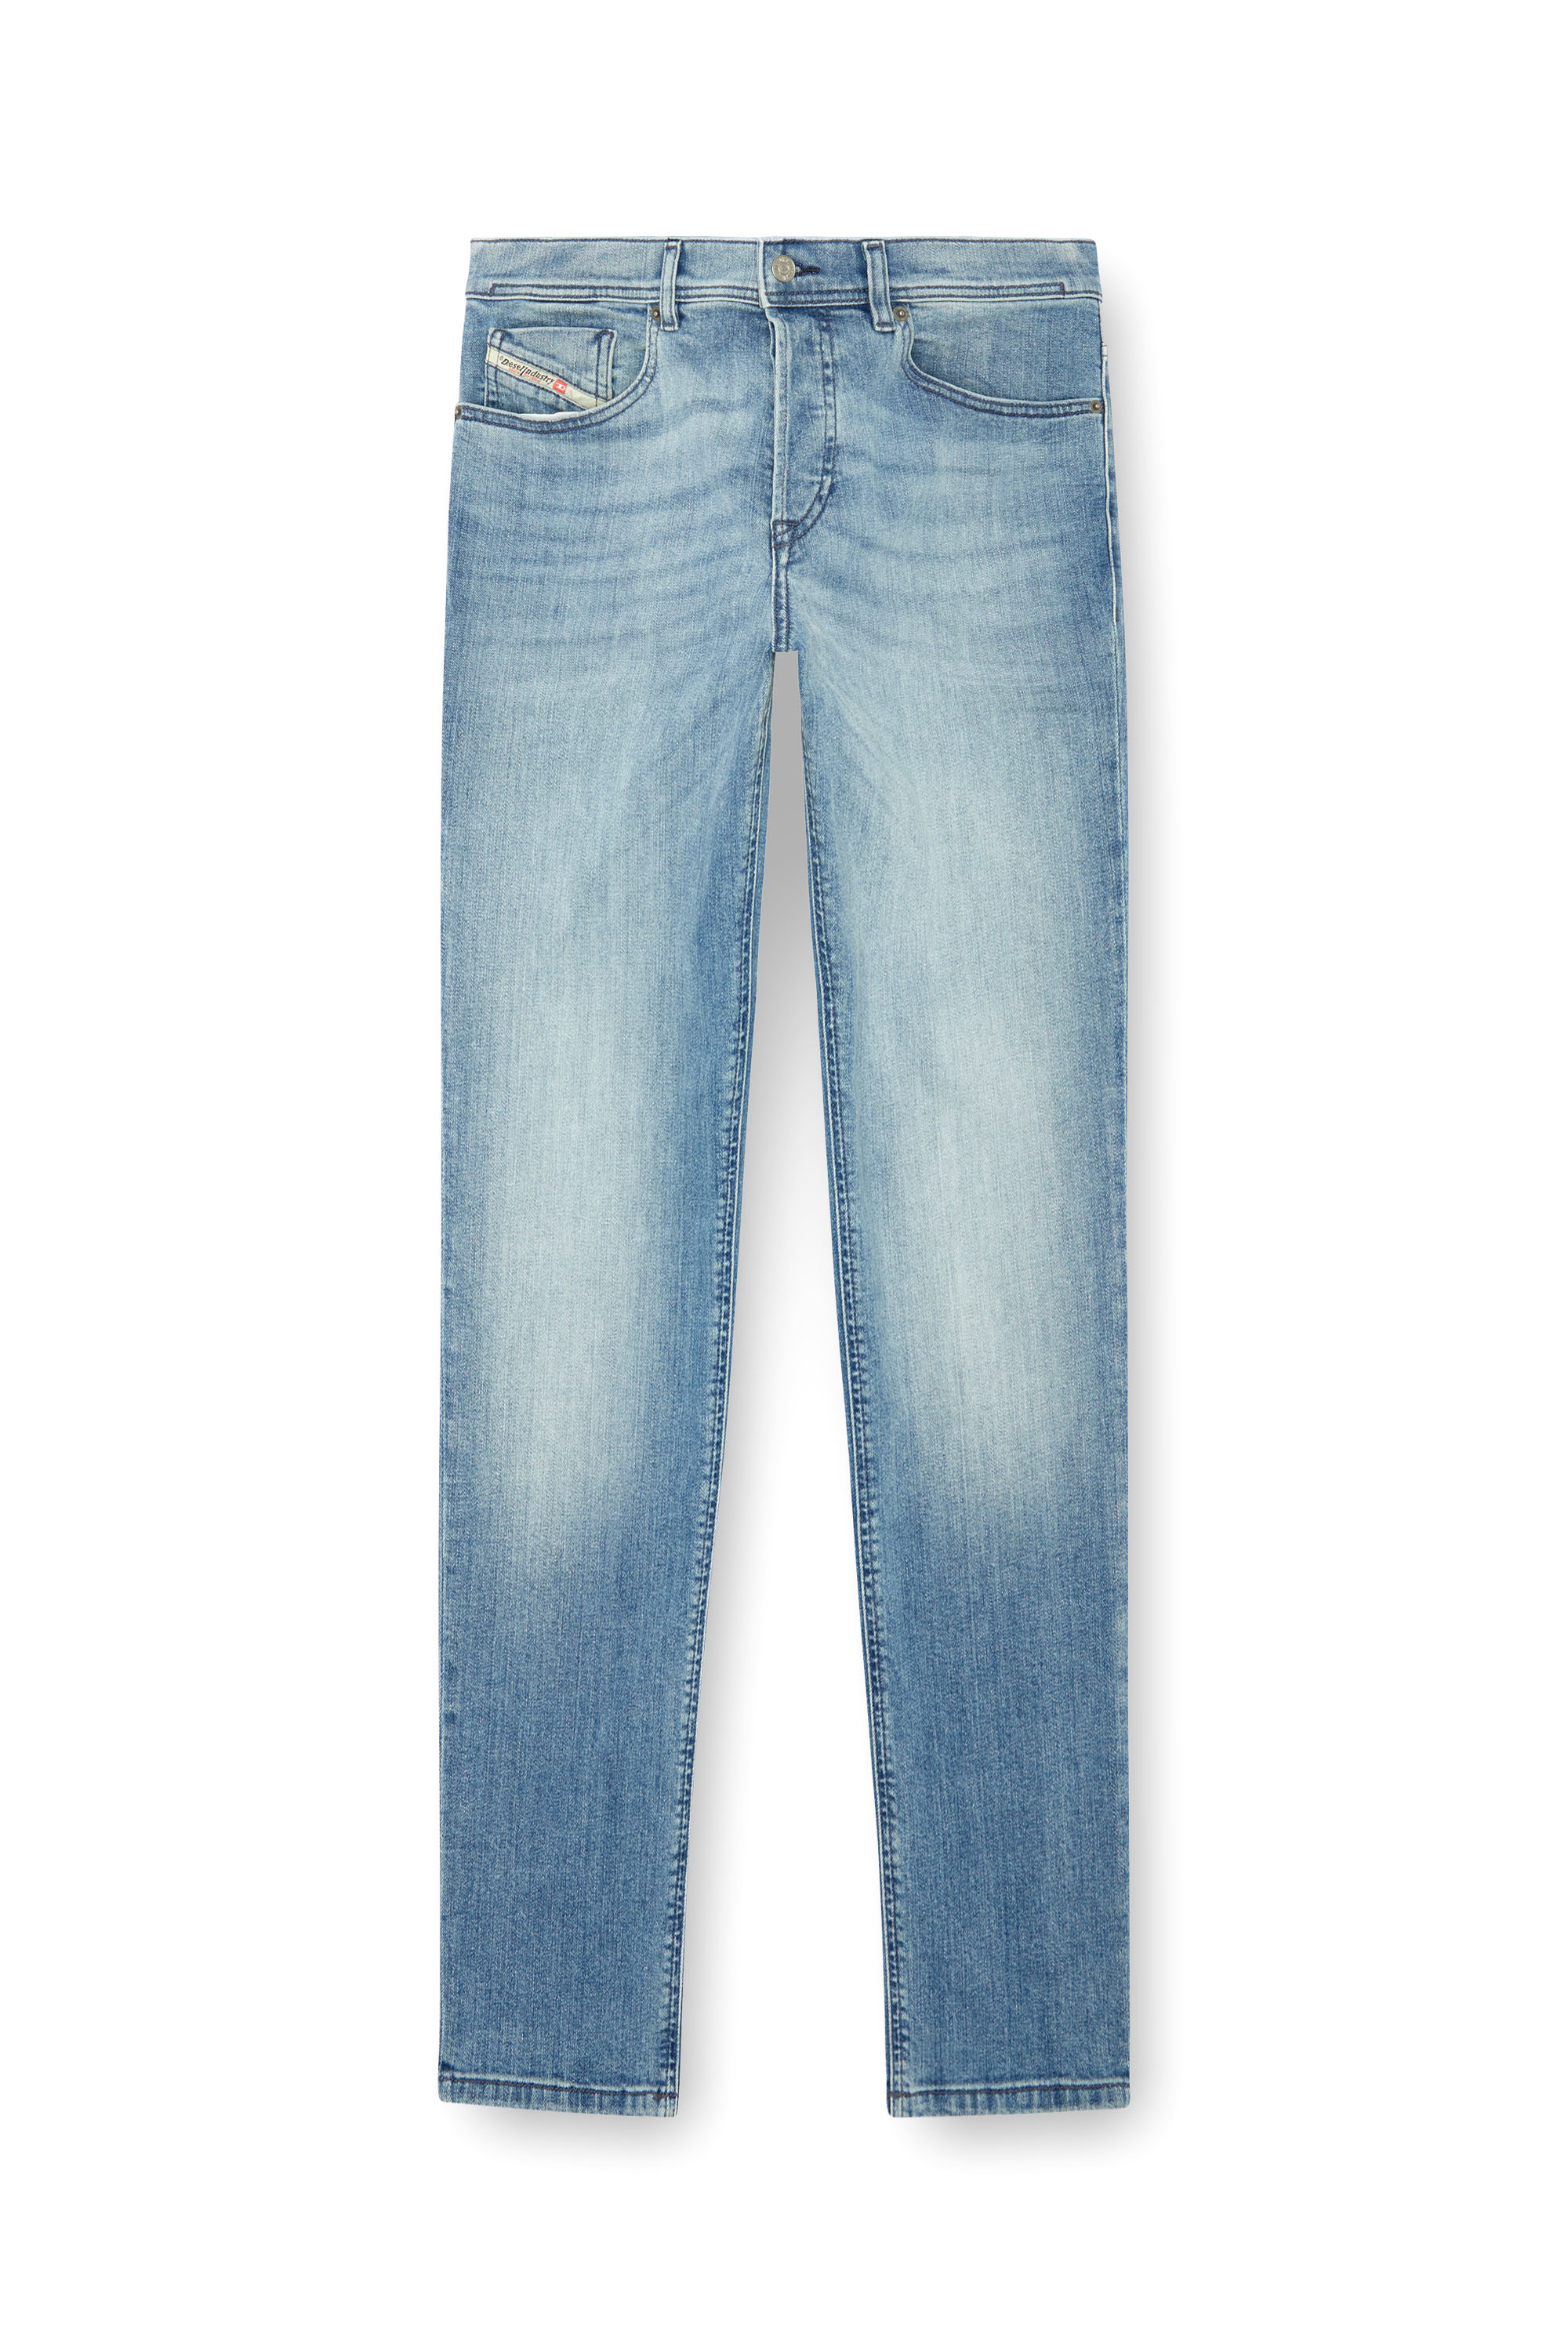 Diesel - Tapered Jeans 2023 D-Finitive 0GRDI, Hombre Tapered Jeans - 2023 D-Finitive in Azul marino - Image 5